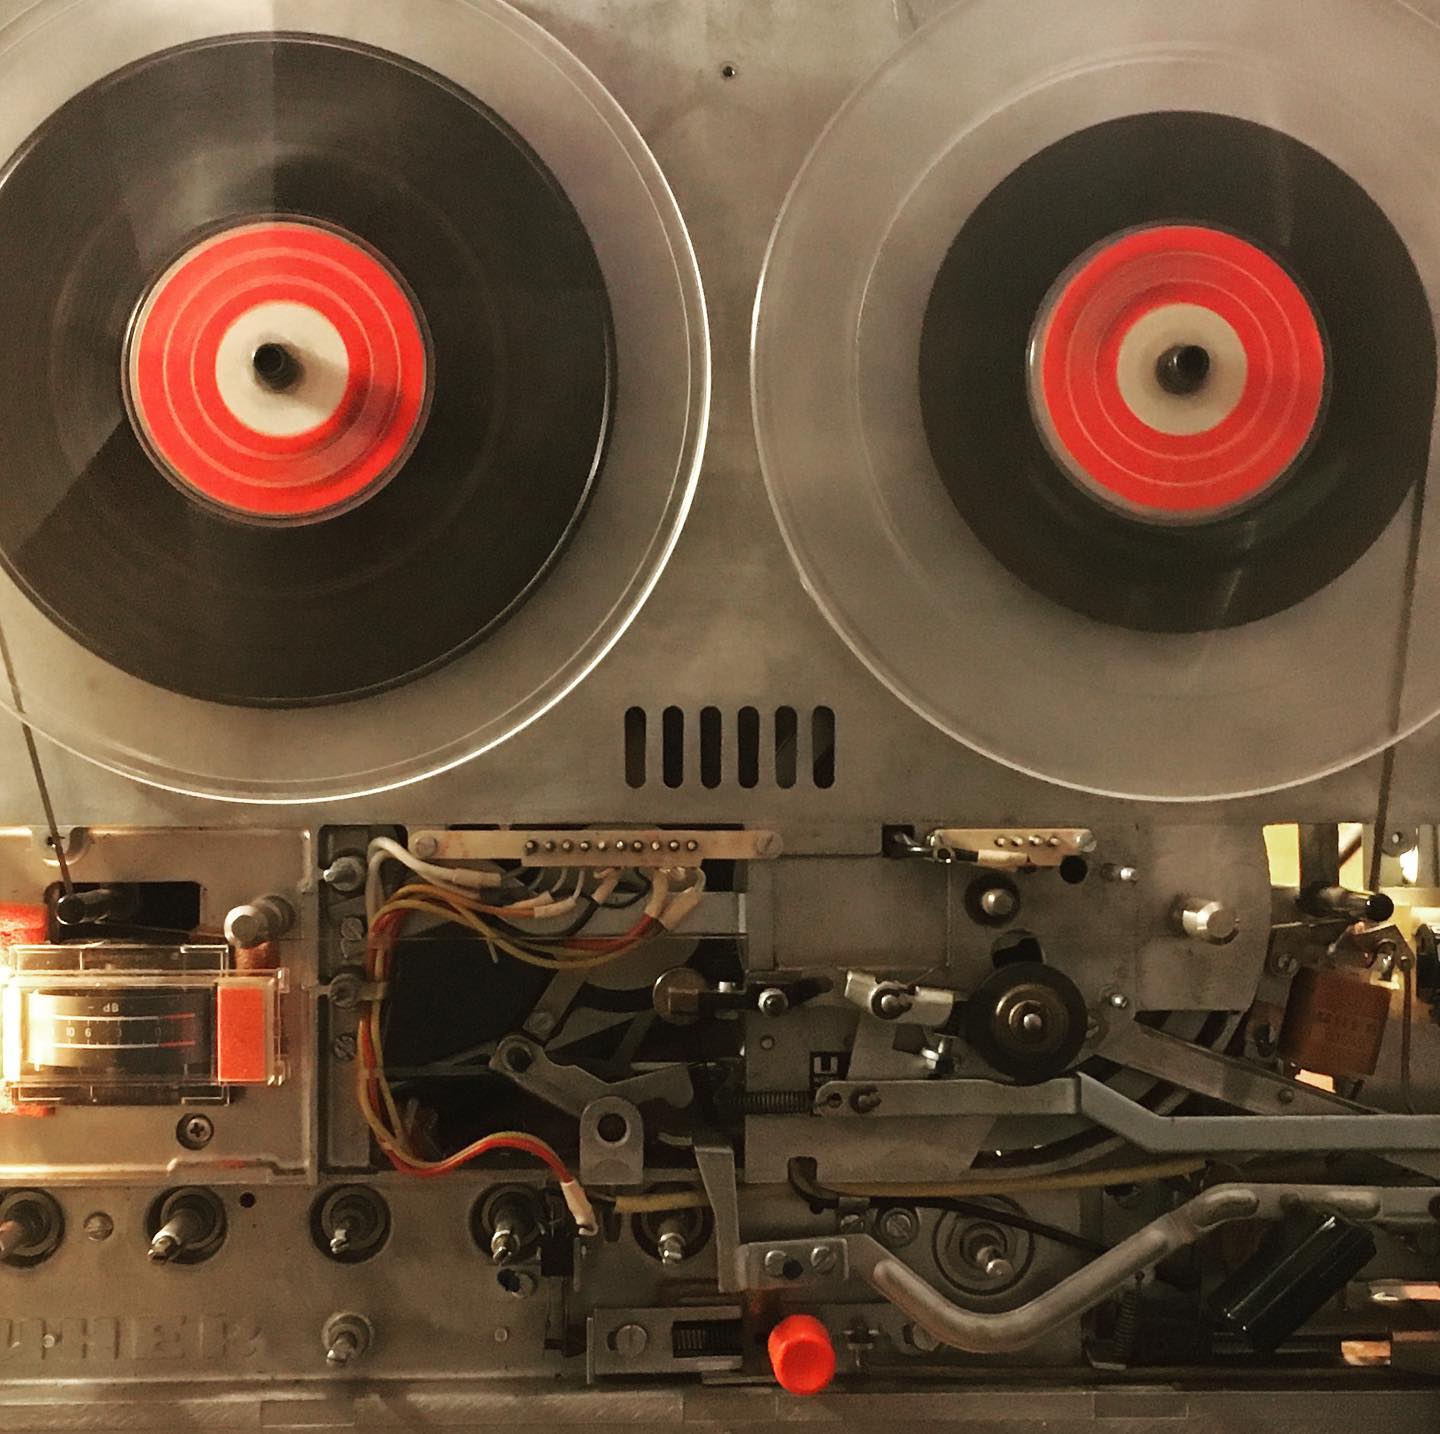 Tape machine is naked and NOT happy about it.